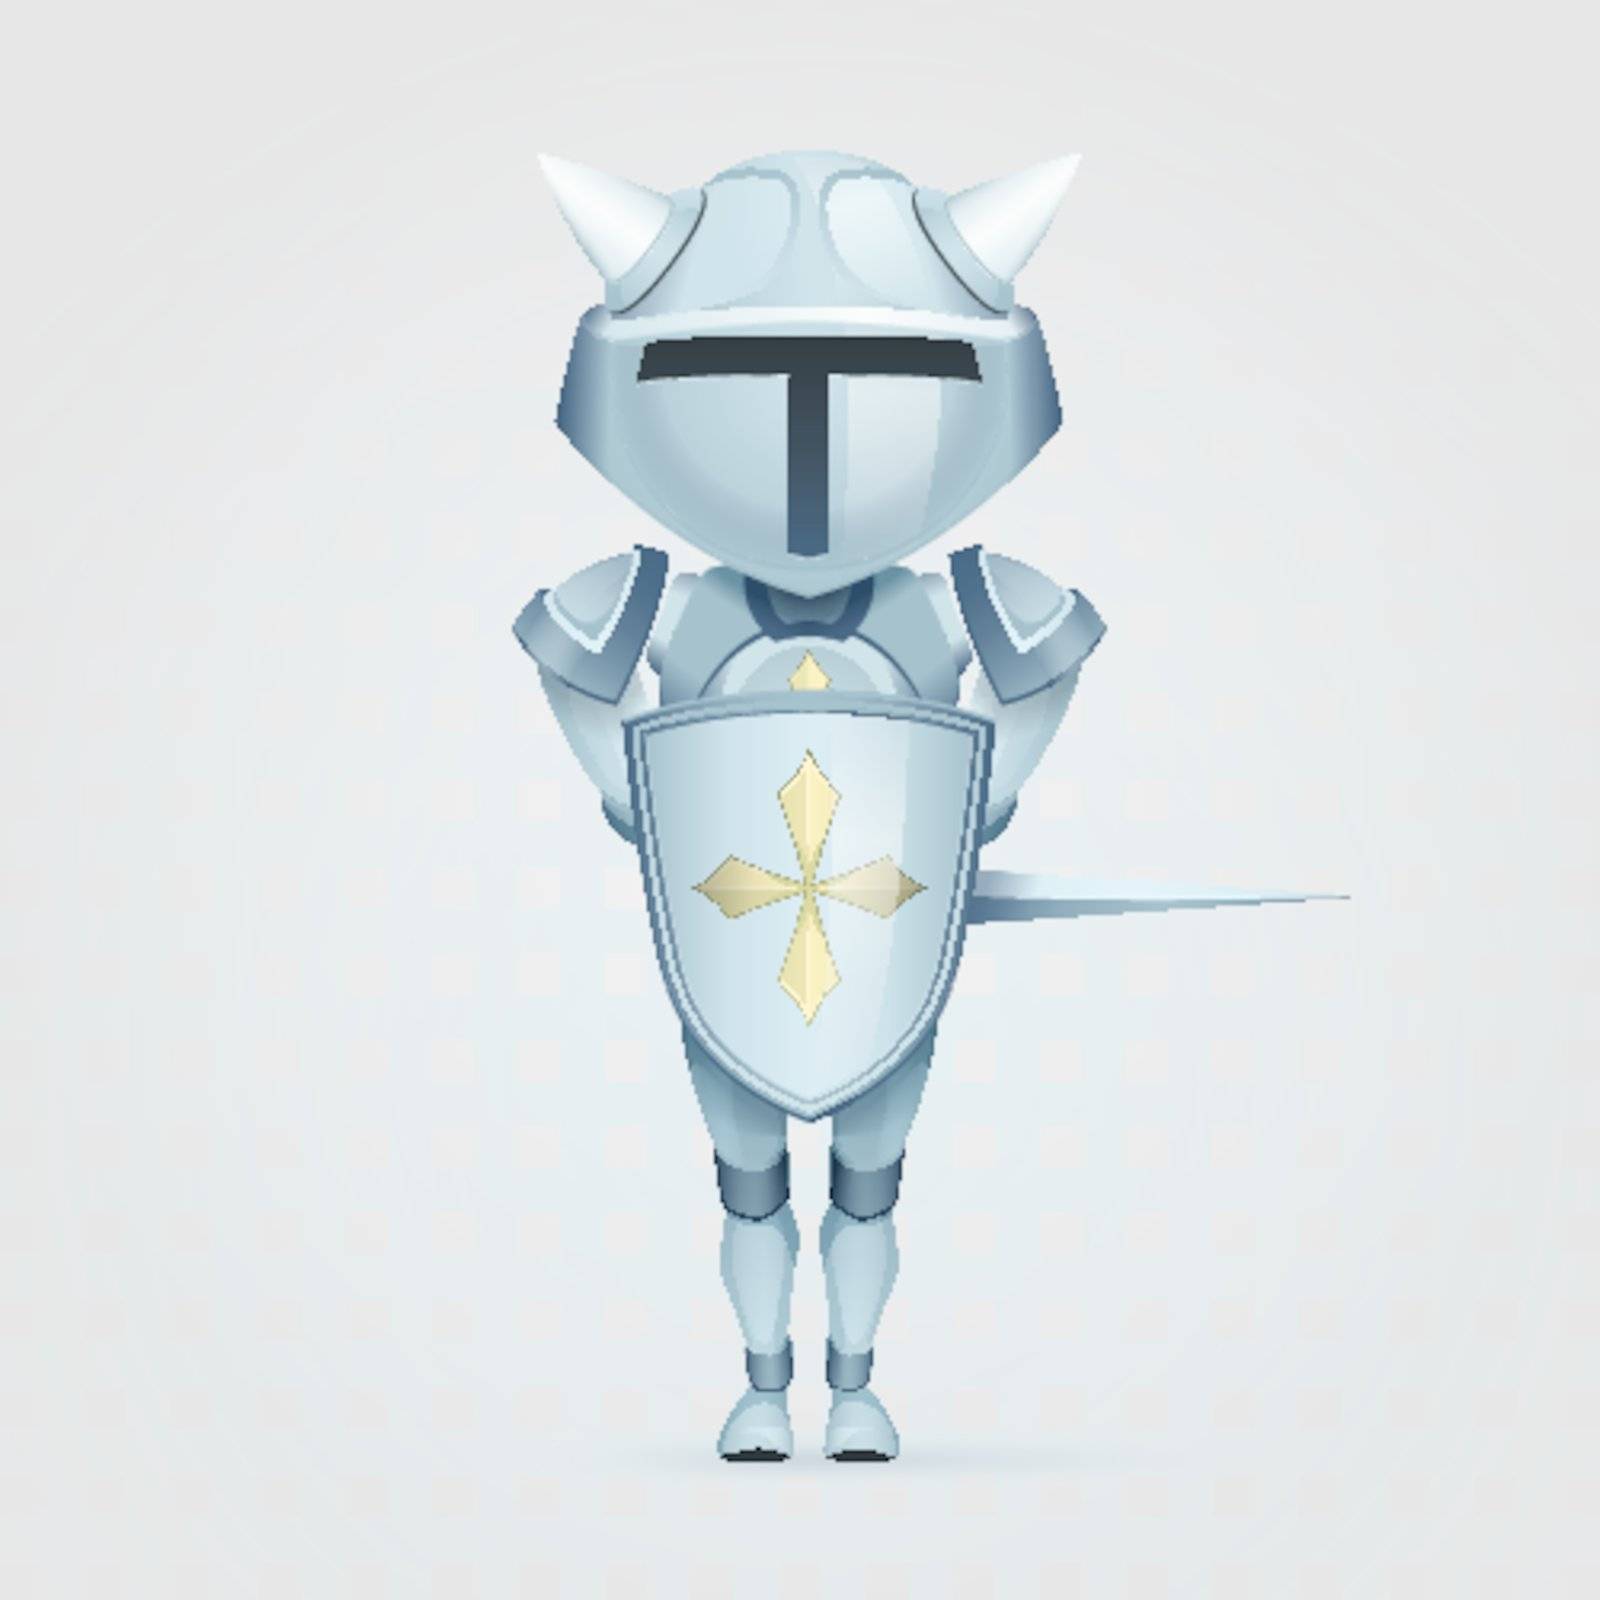 crusader knight with a big head is covered with a shield